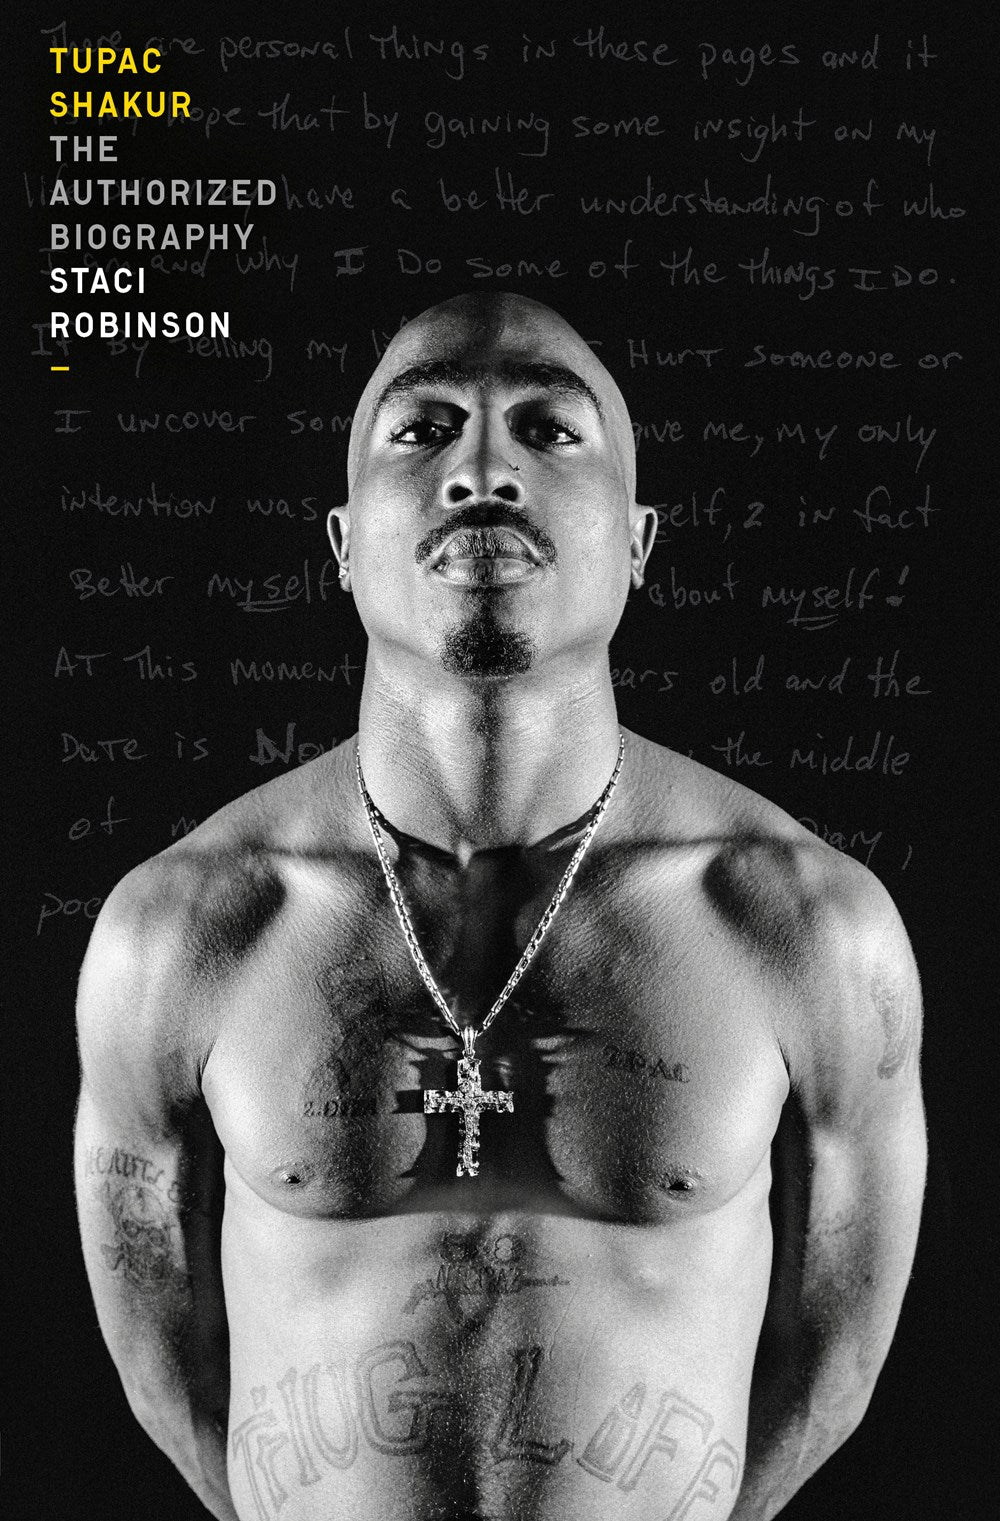 Tupac Shakur: The Authorized Biography by Staci Robinson (Hardcover) (PREORDER)